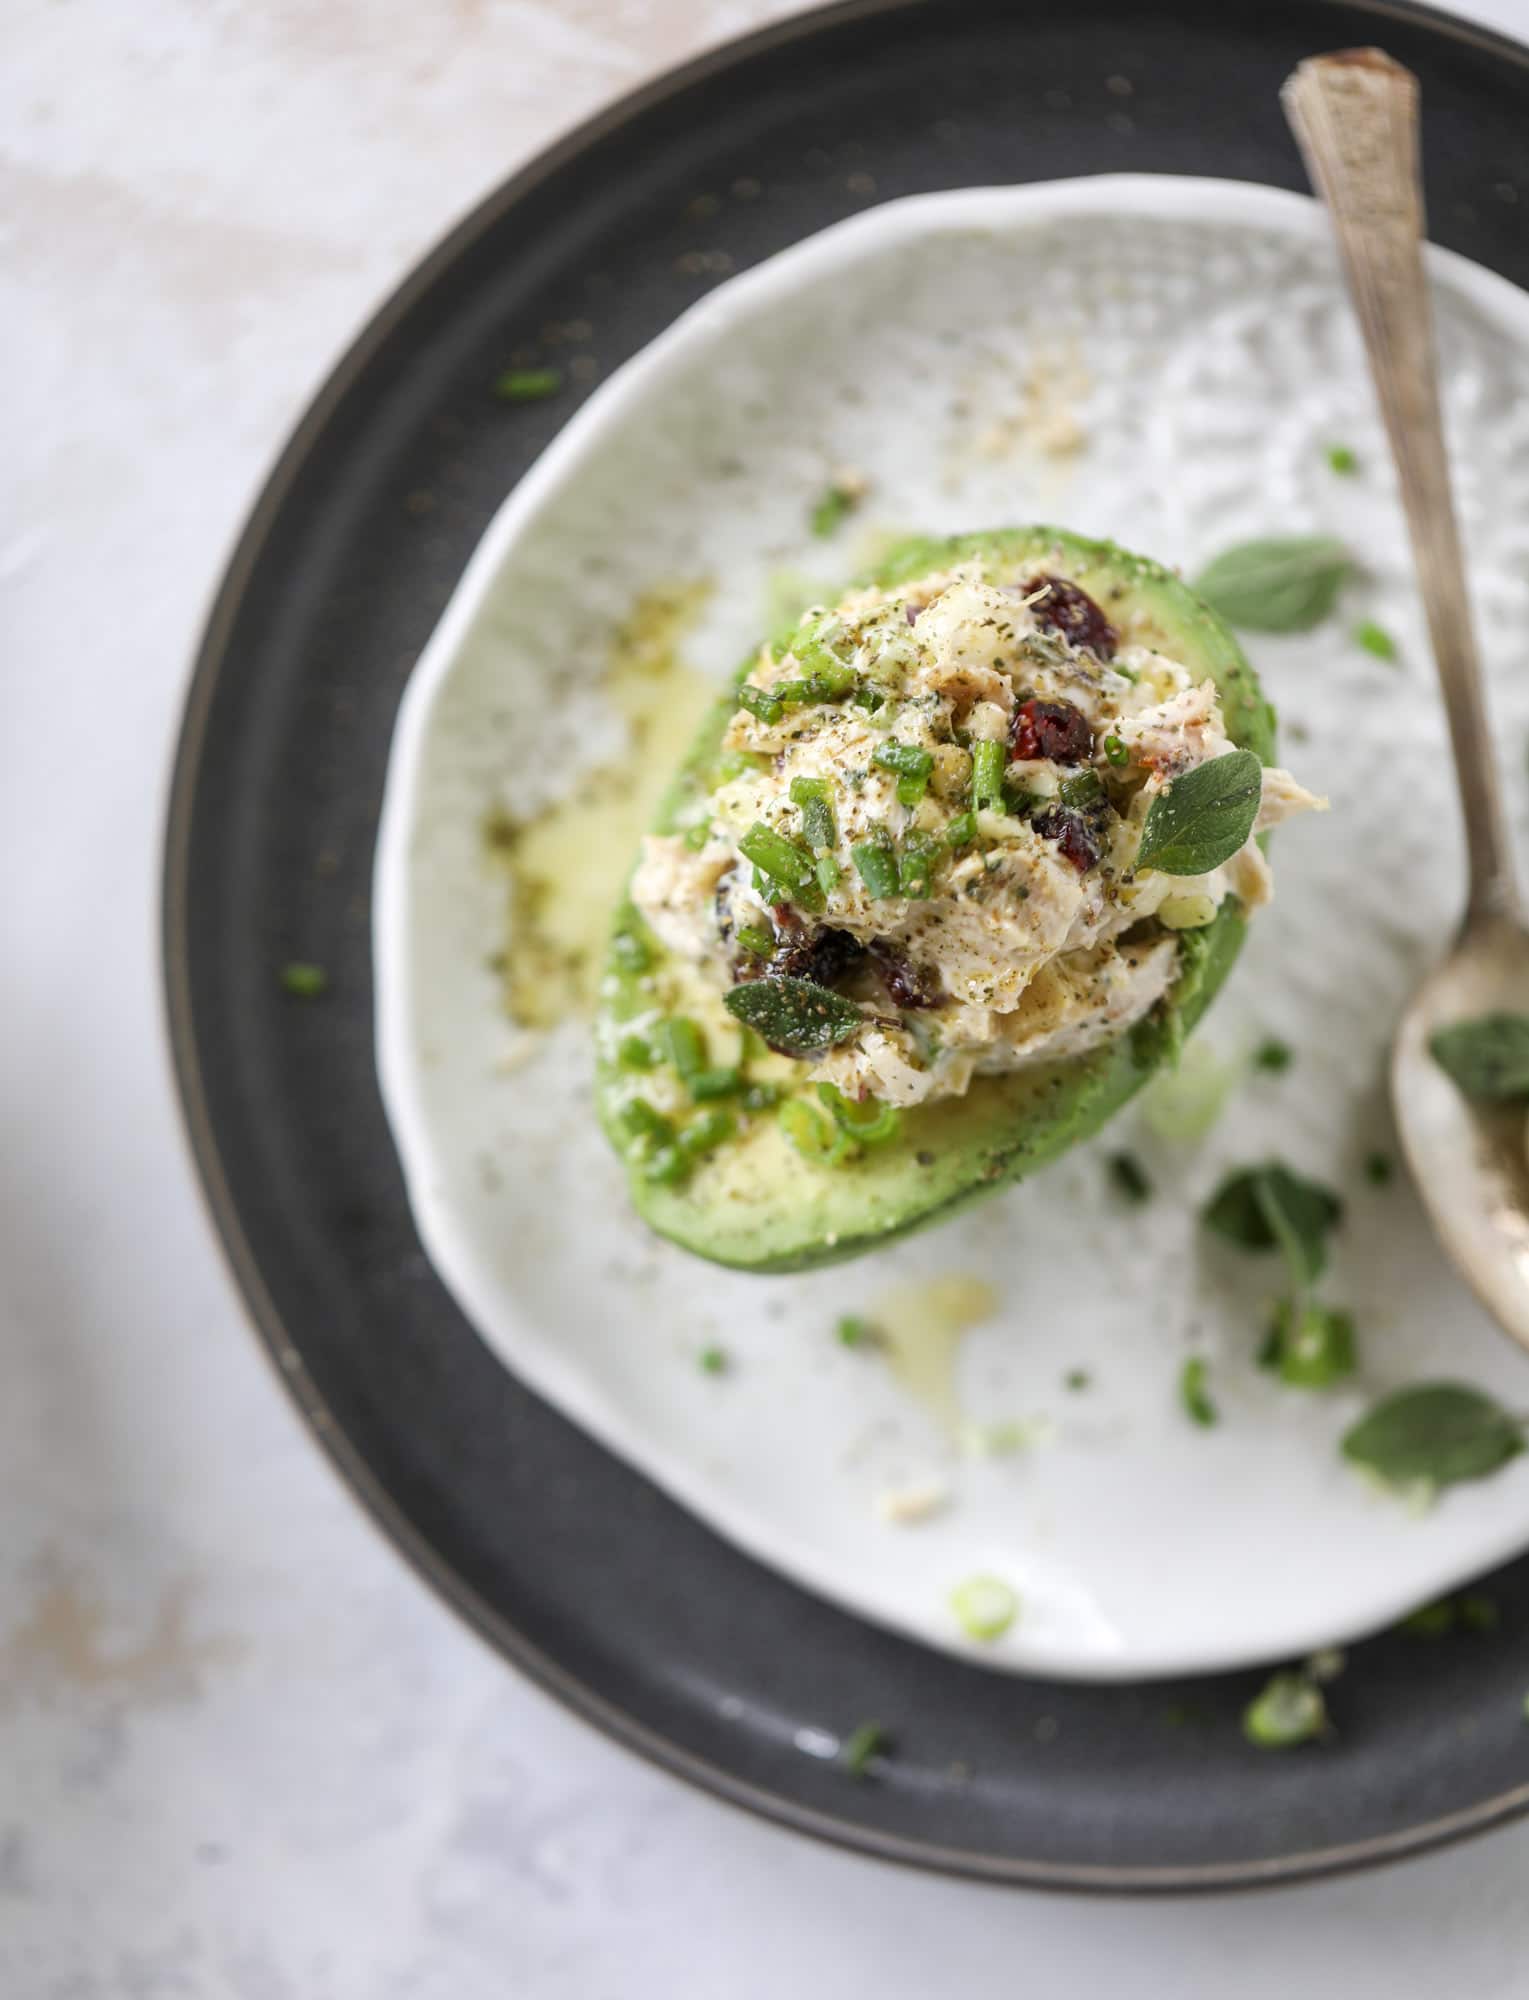 These smoky chicken salad stuffed avocados are lunchtime gold! They are super easy to throw together, satisfying and pretty darn great for you. Made with greek yogurt, some tangy mustard and dried cherries for sweetness, they are delish! I howsweeteats.com #chicken #salad #stuffed #avocados #greekyogurt